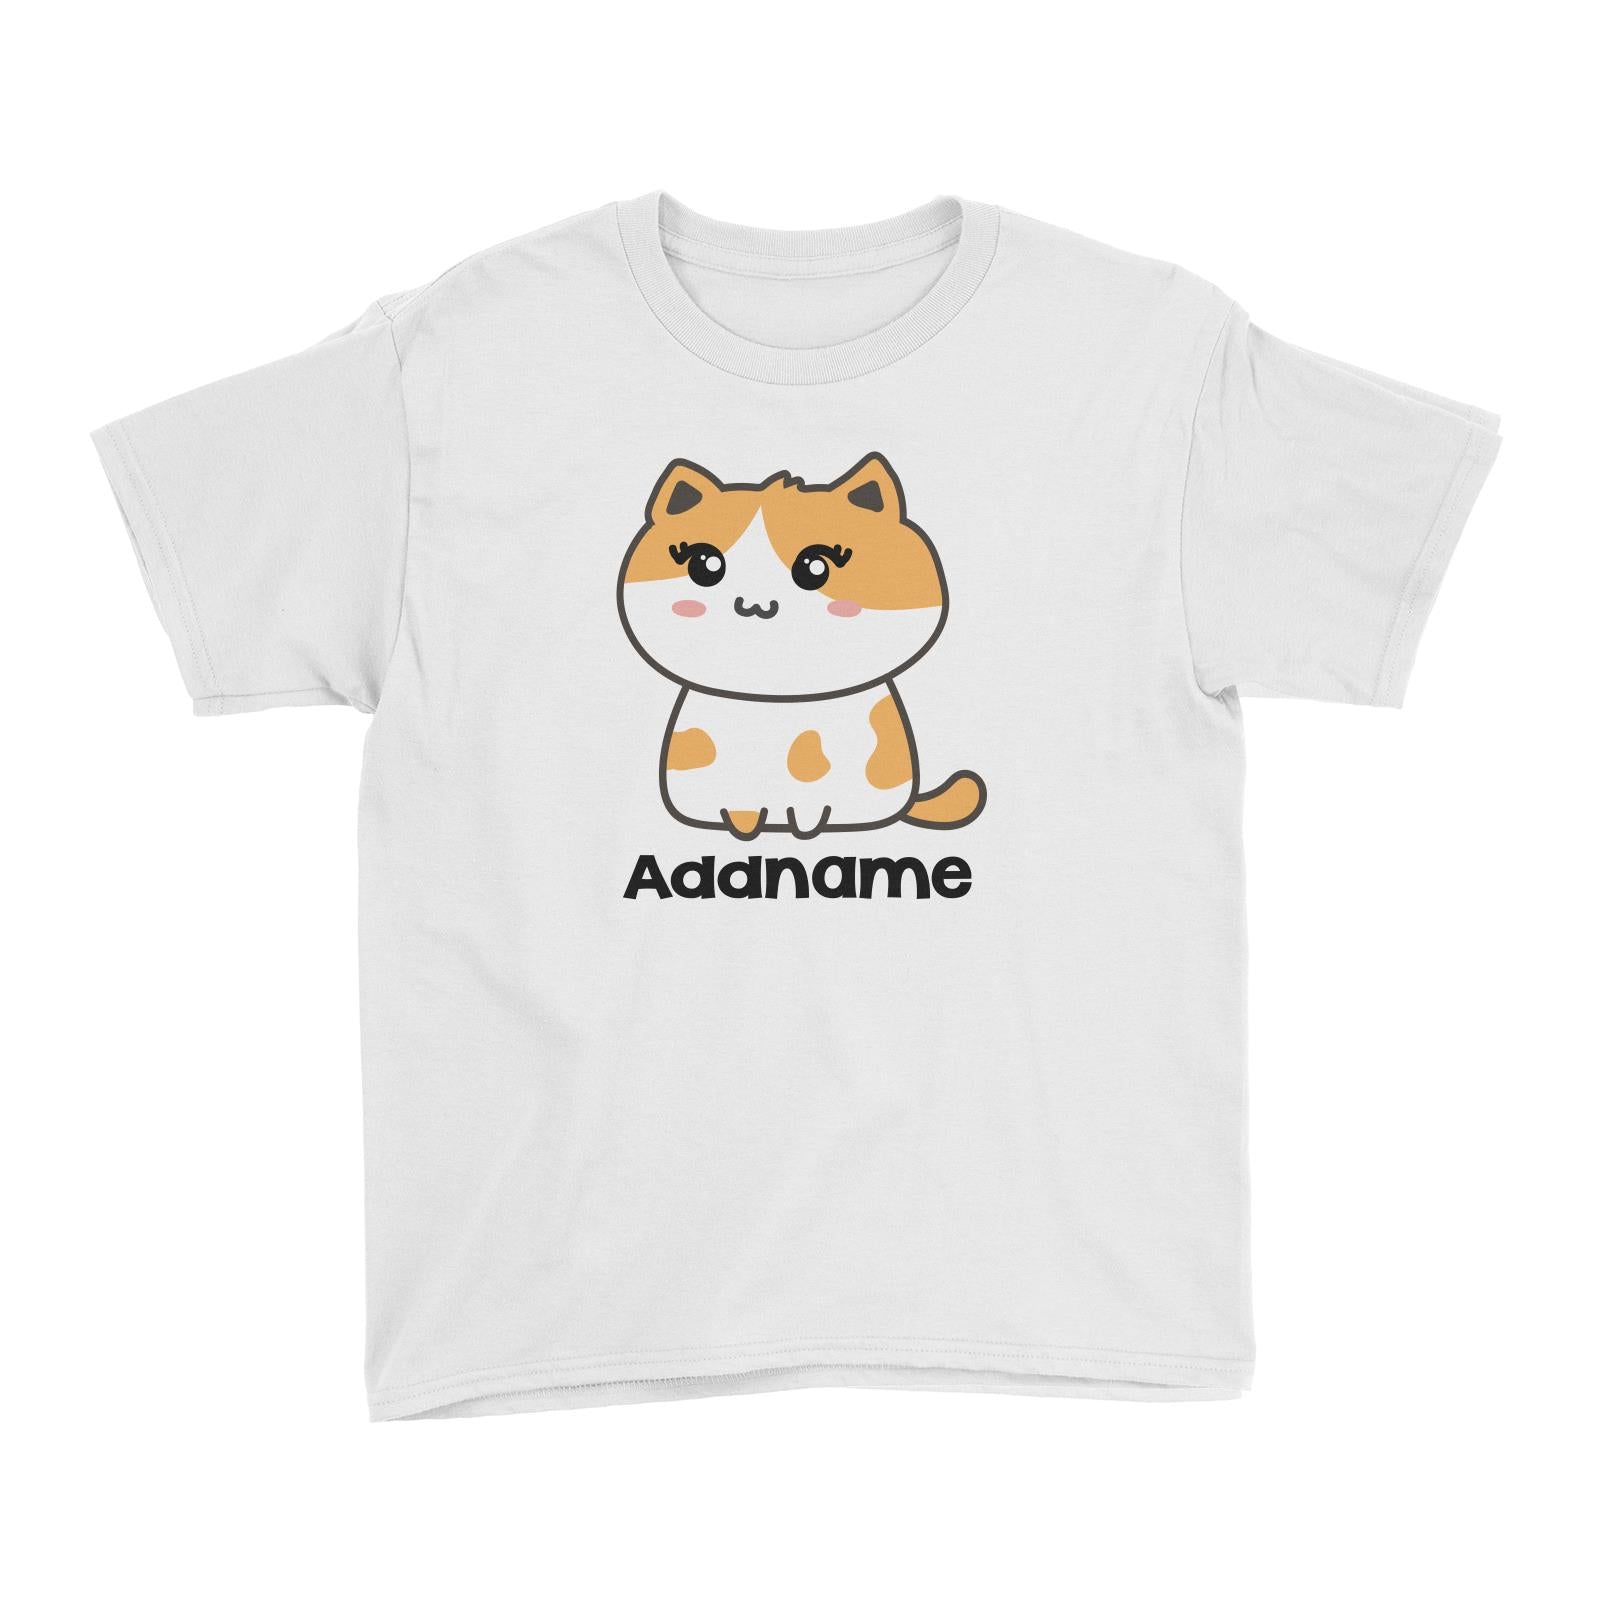 Drawn Adorable Cats White & Yellow Addname Kid's T-Shirt